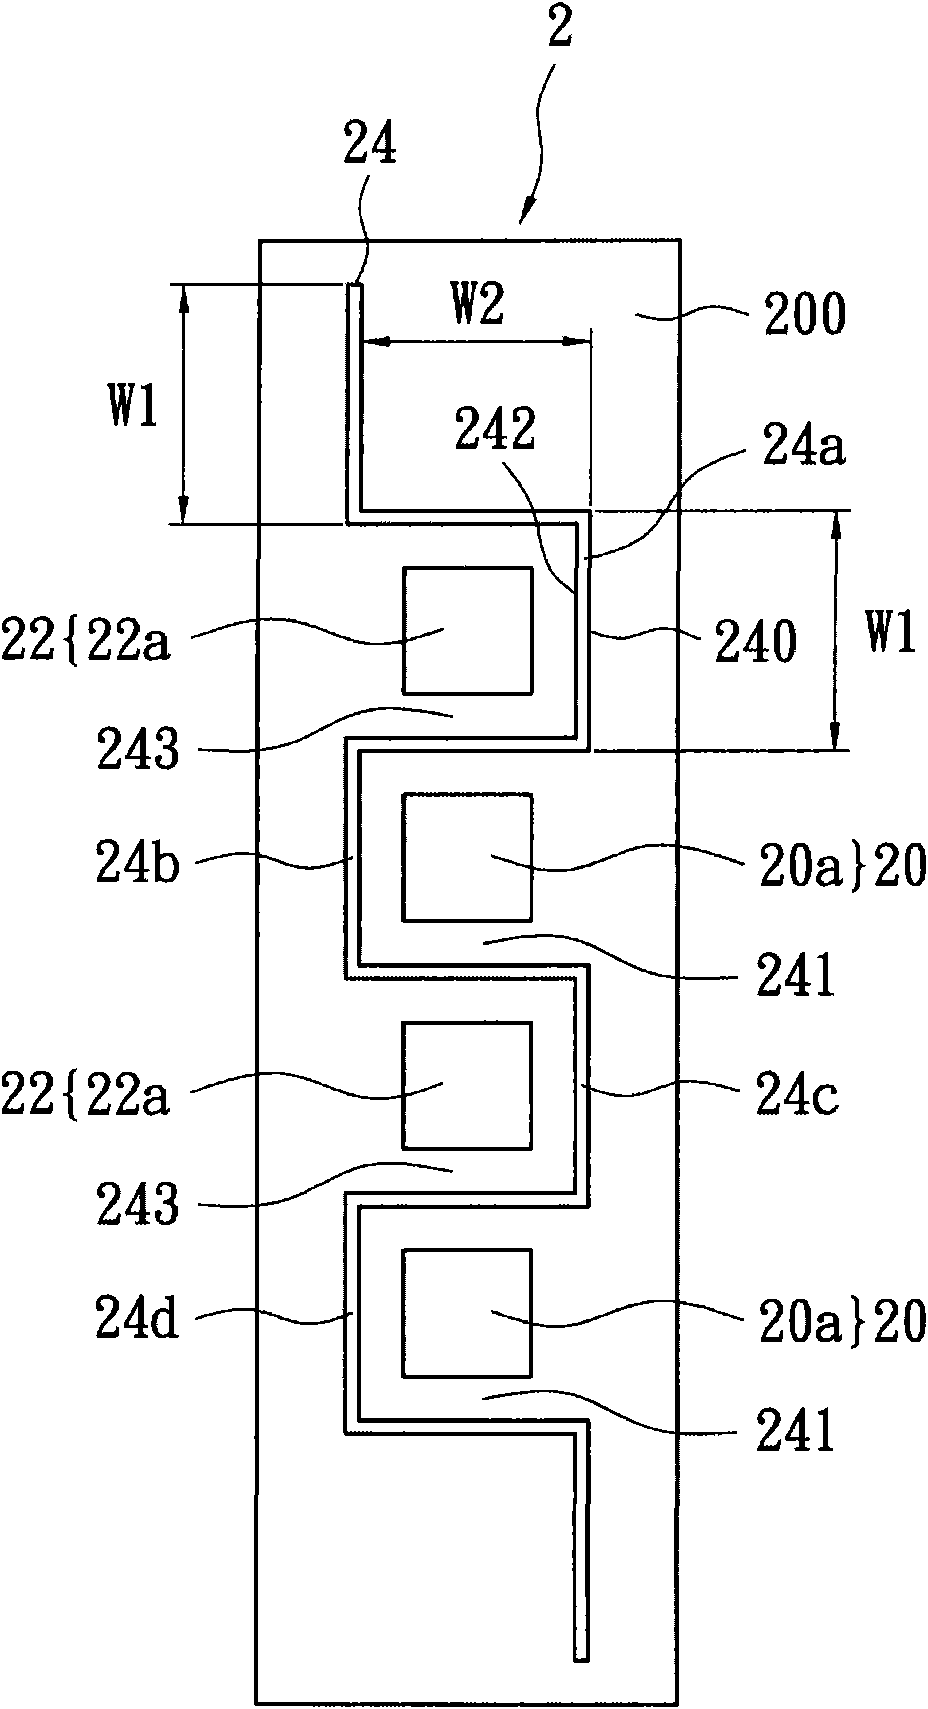 Layout structure of power metal oxide semi-field effect transistor (power MOSFET)